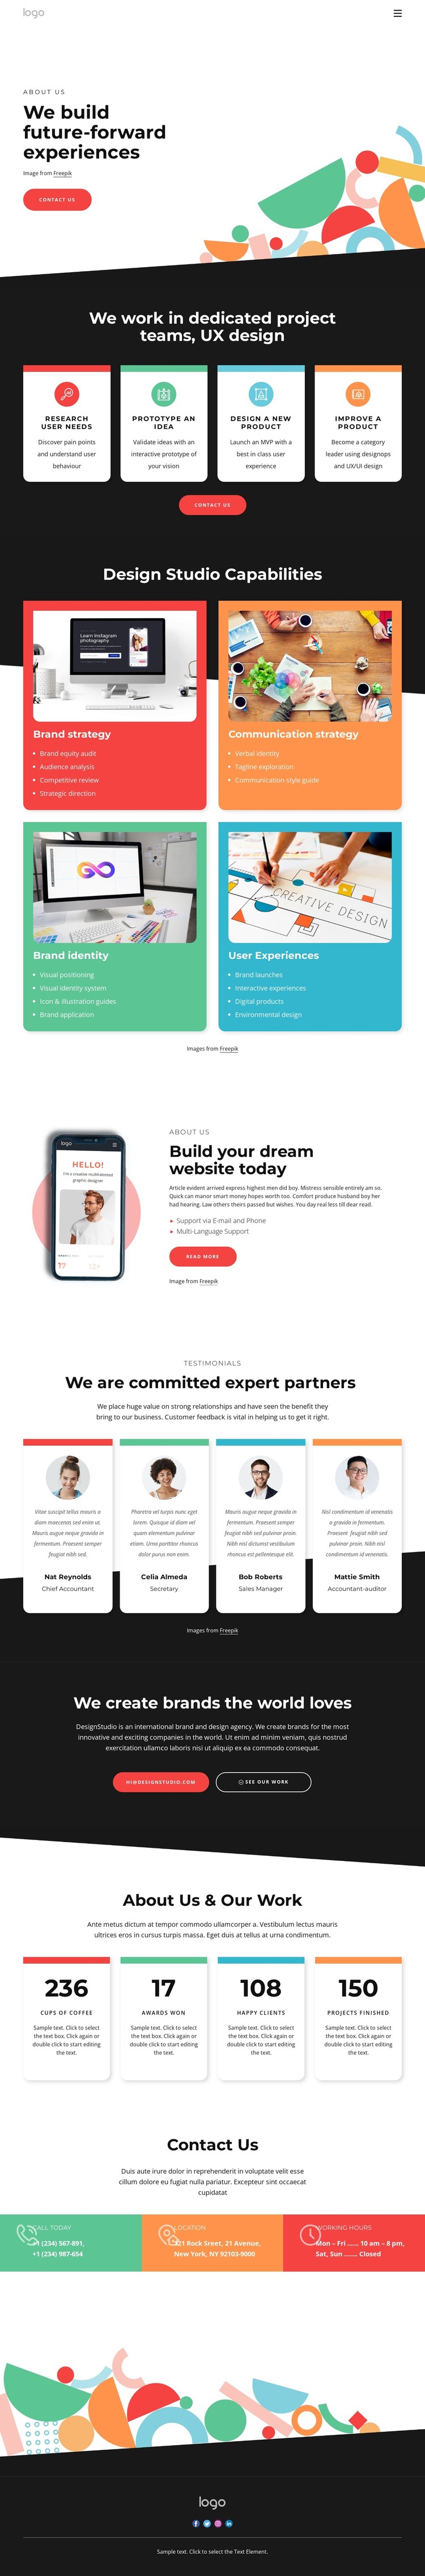 We design with the future in mind WordPress Theme